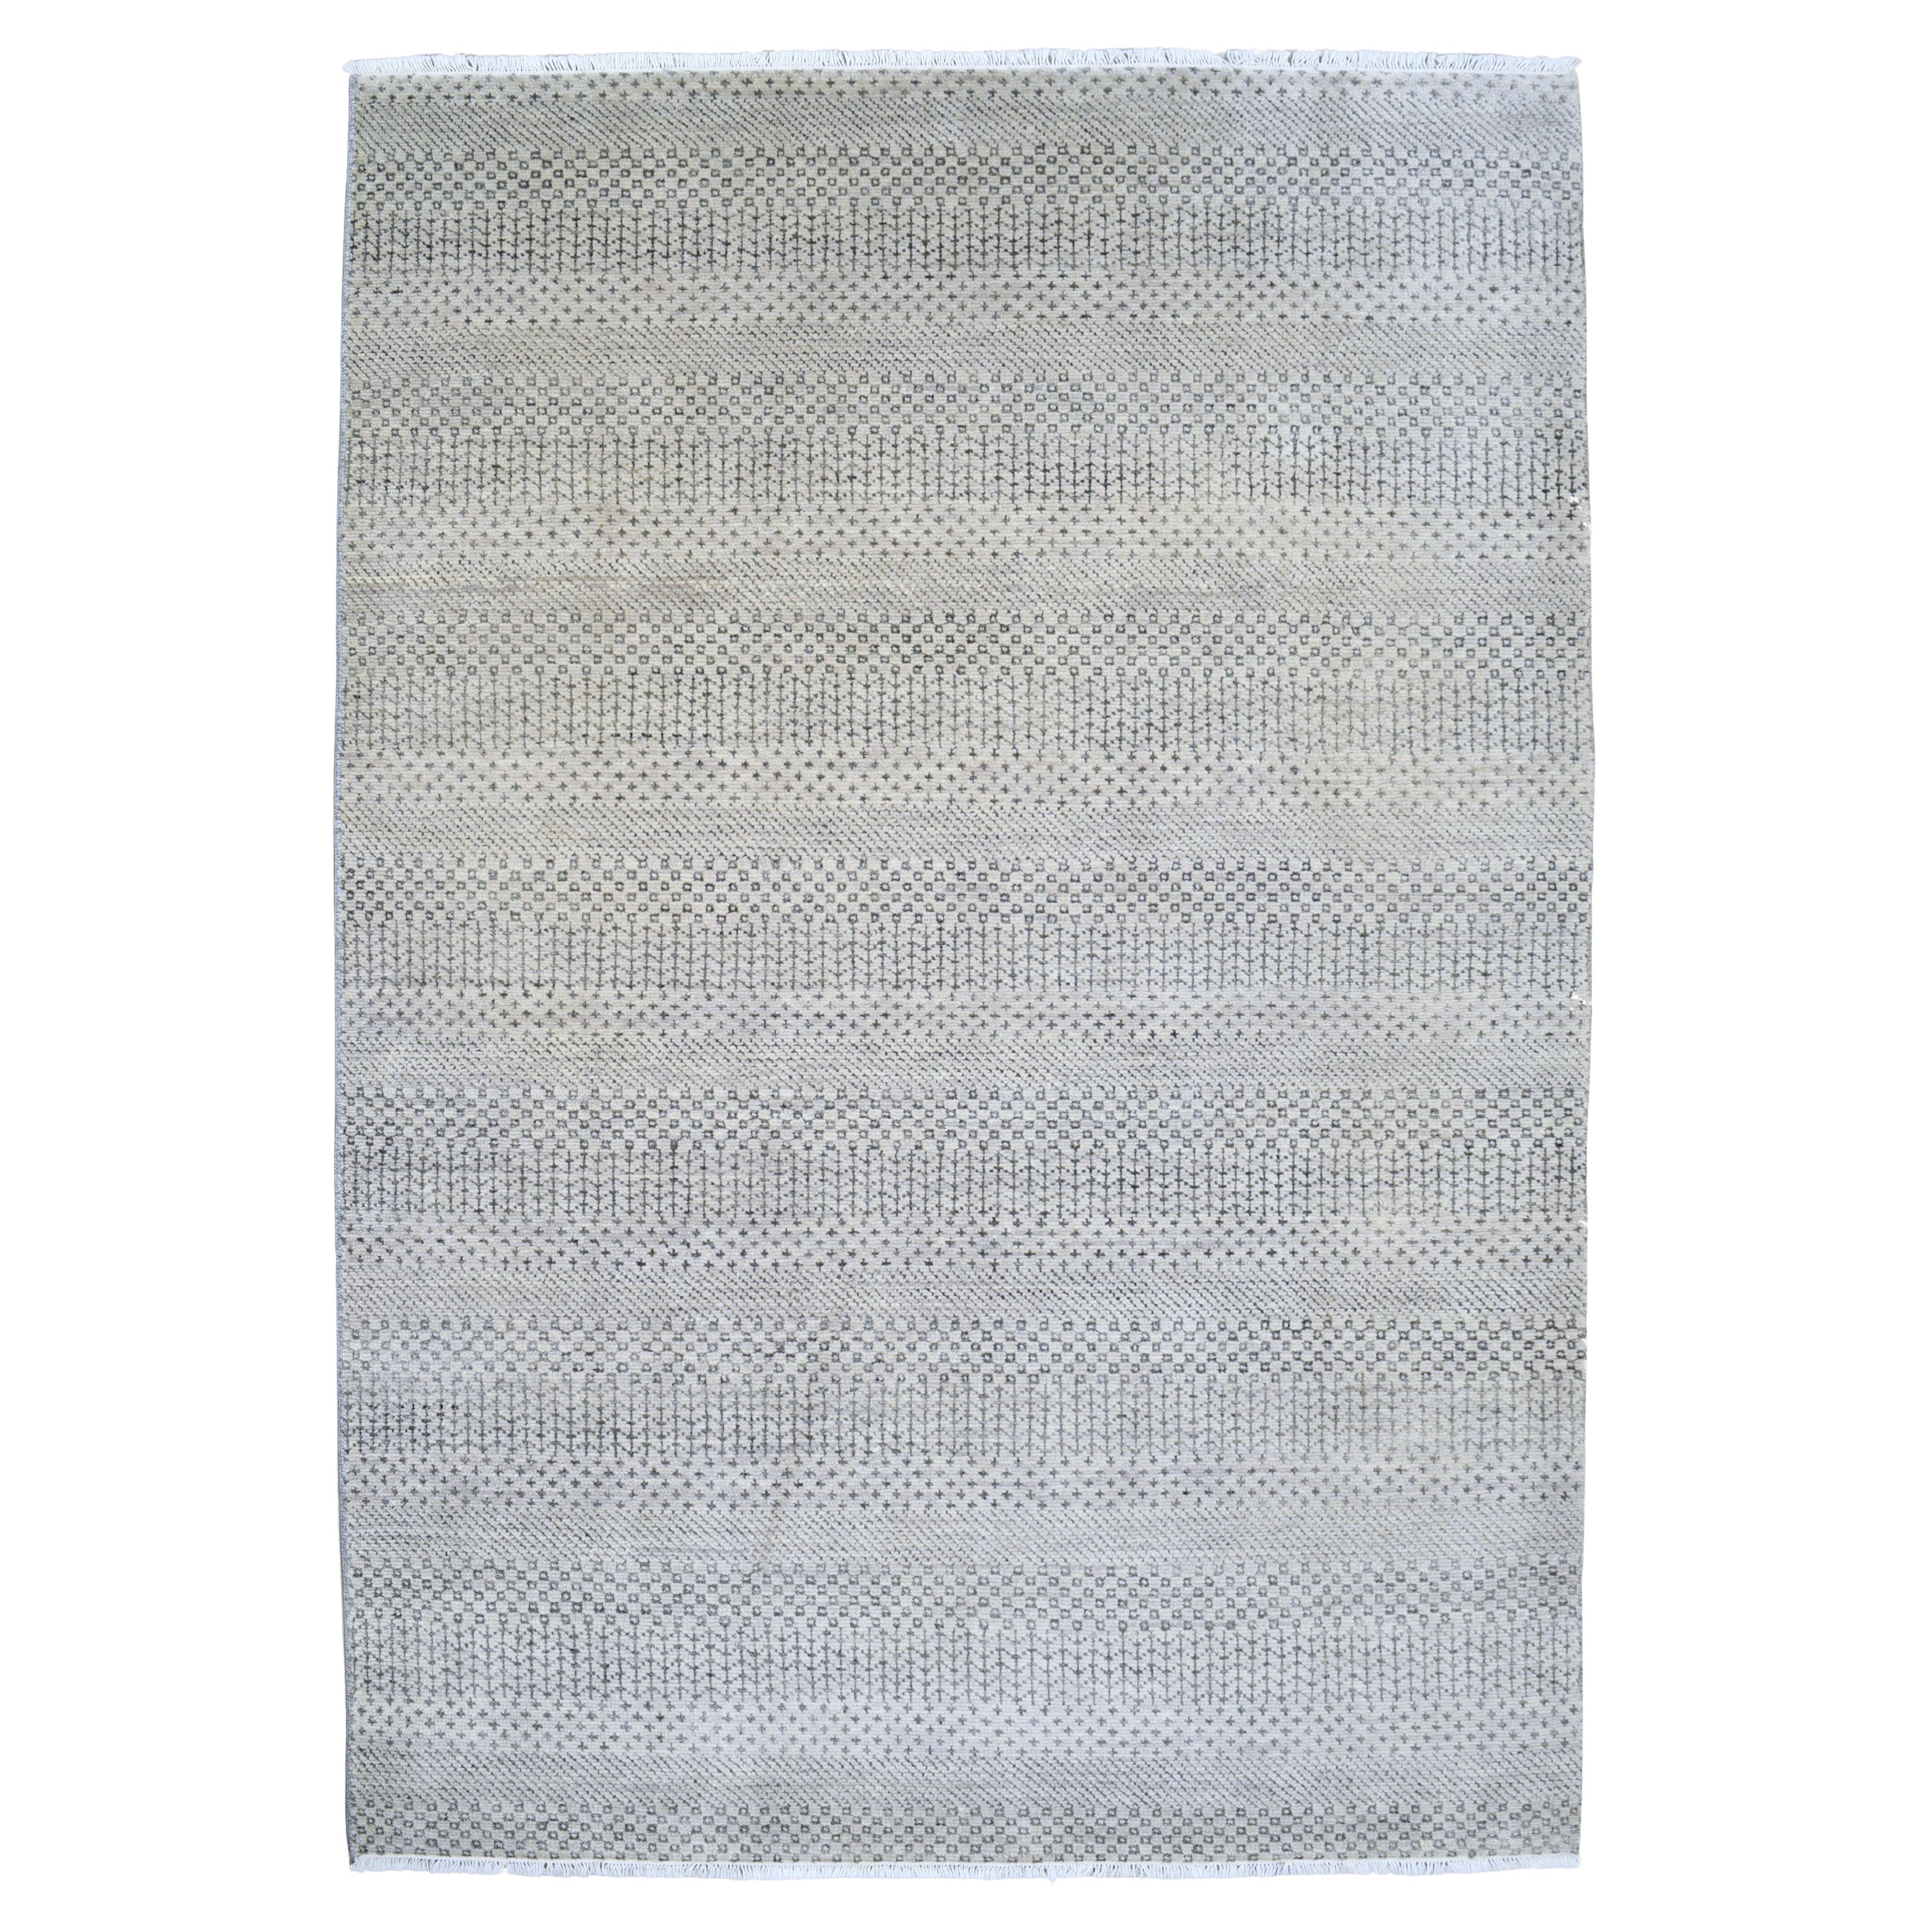 Gray on Gray Modern Hand-Knotted Wool Carpet, 6' x 9' For Sale